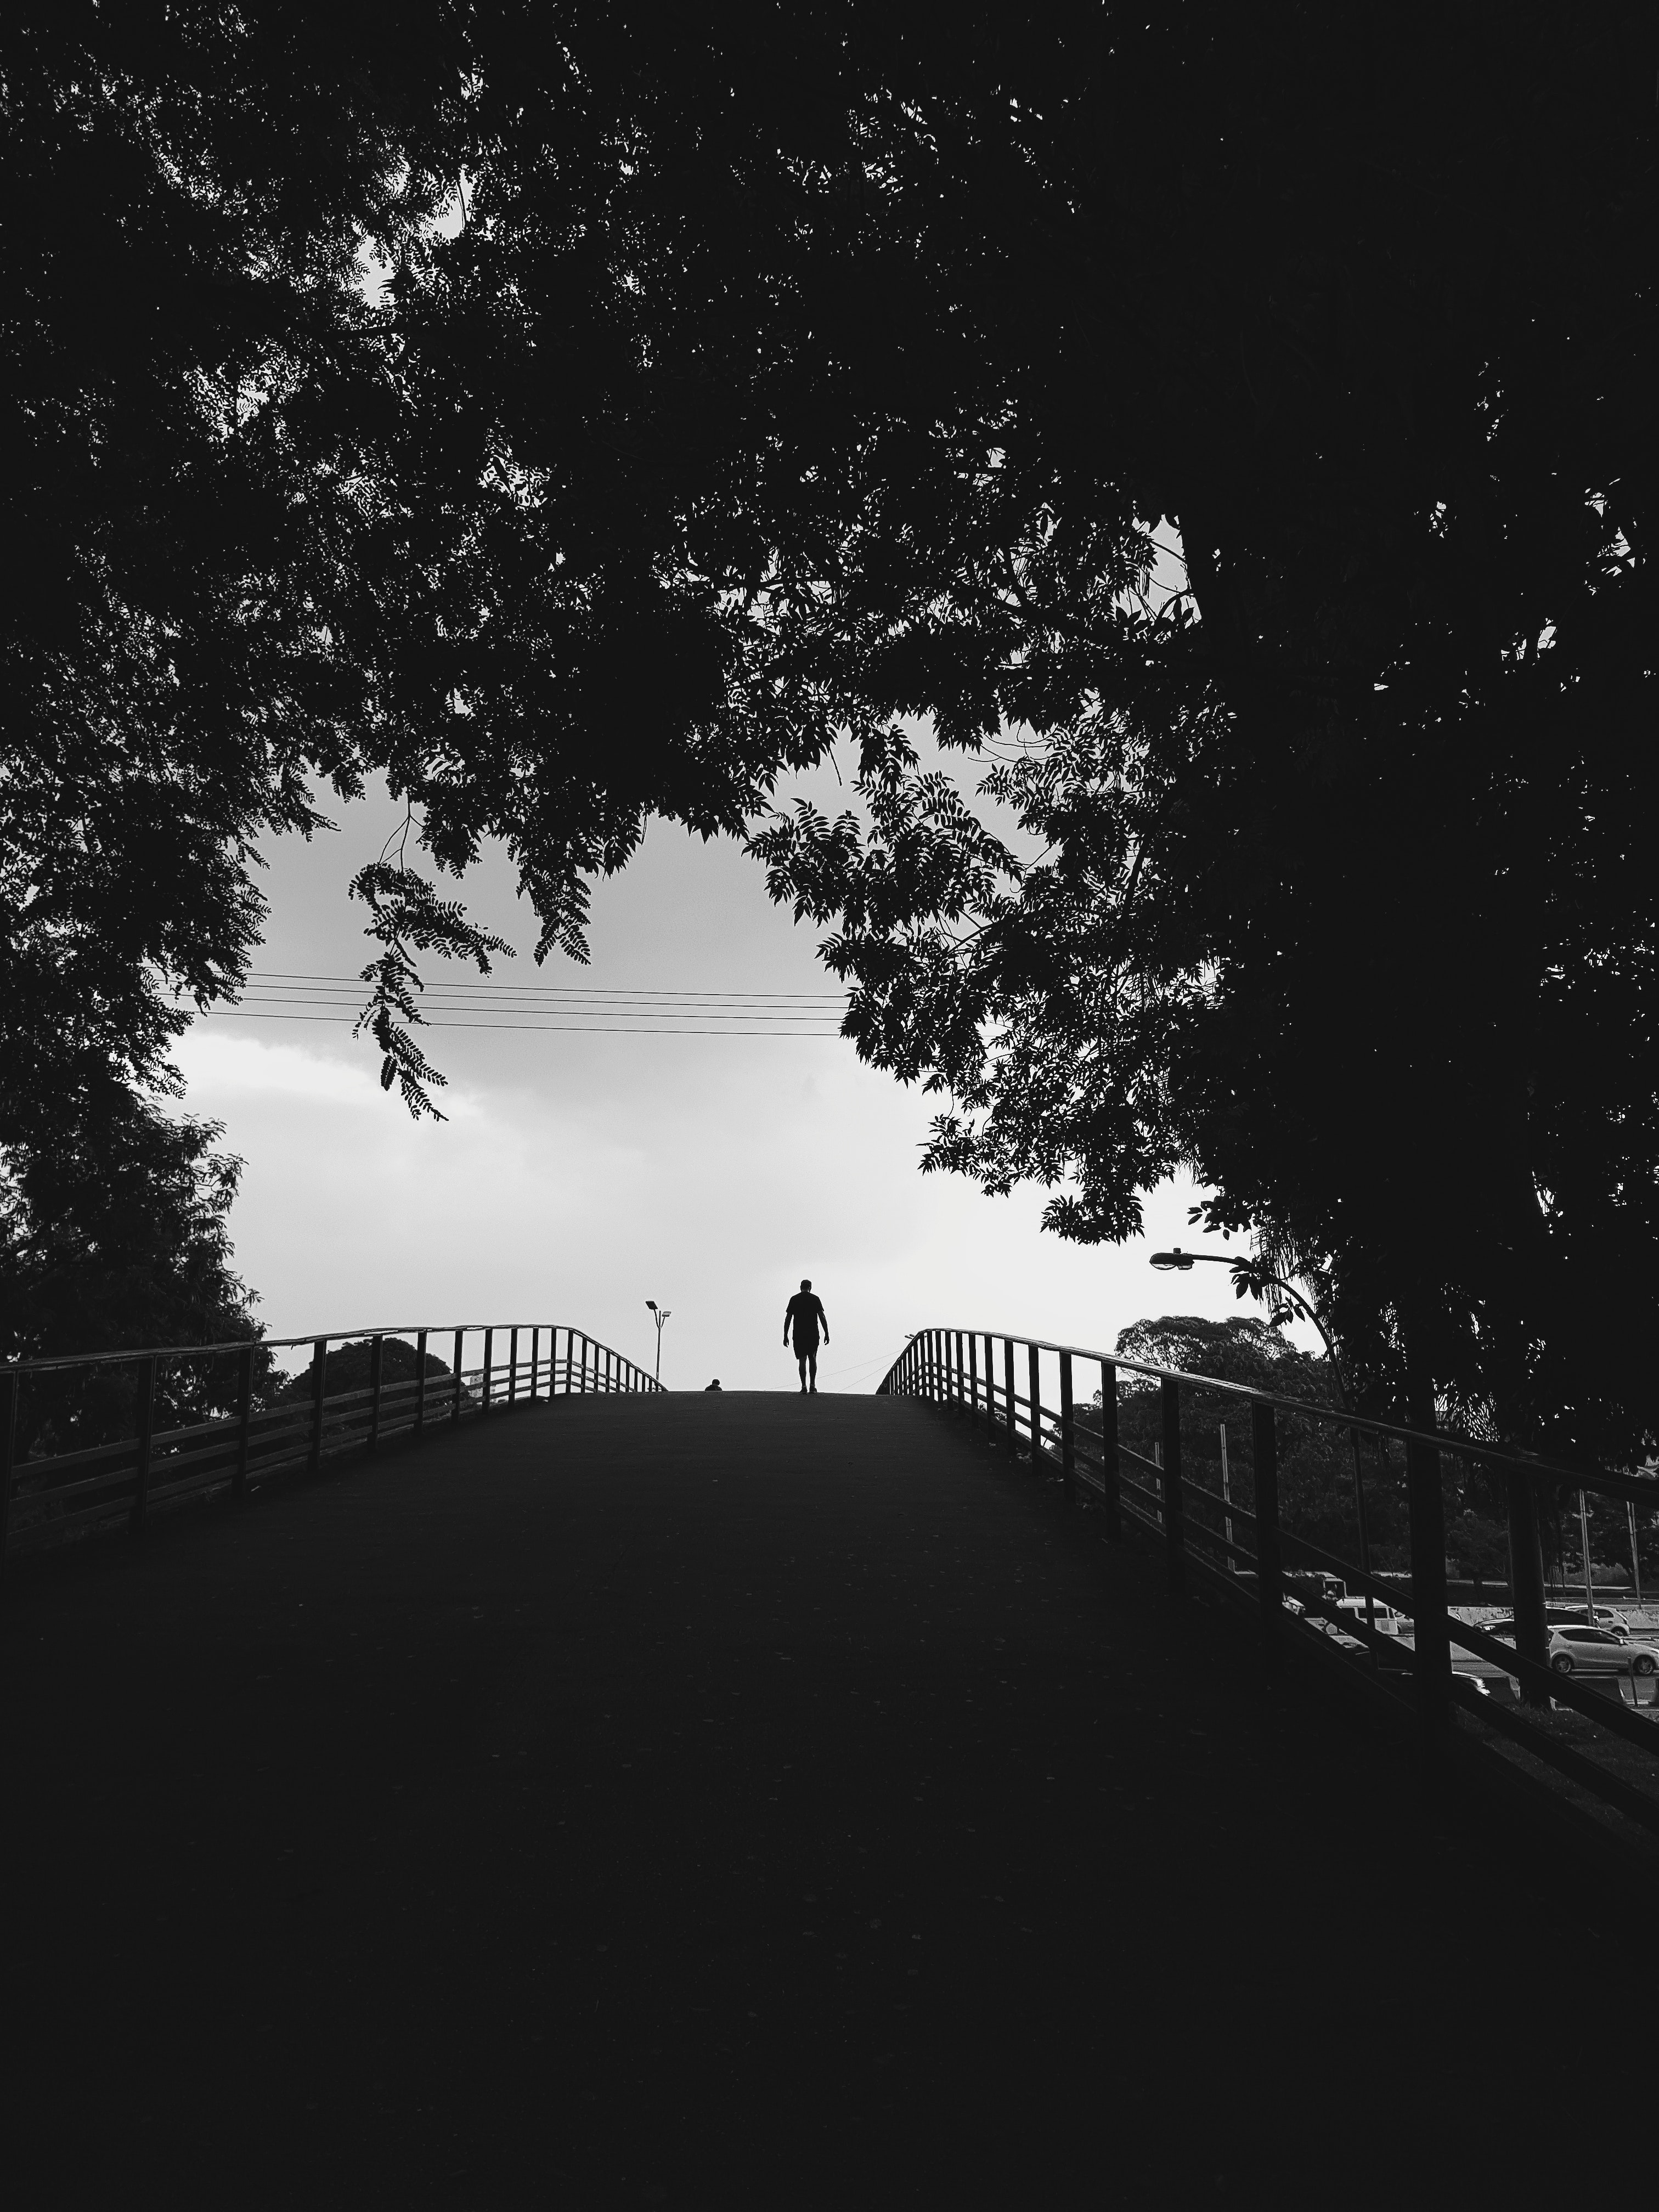 alone, trees, black, silhouette, stroll, bw, chb, loneliness, lonely 4K for PC